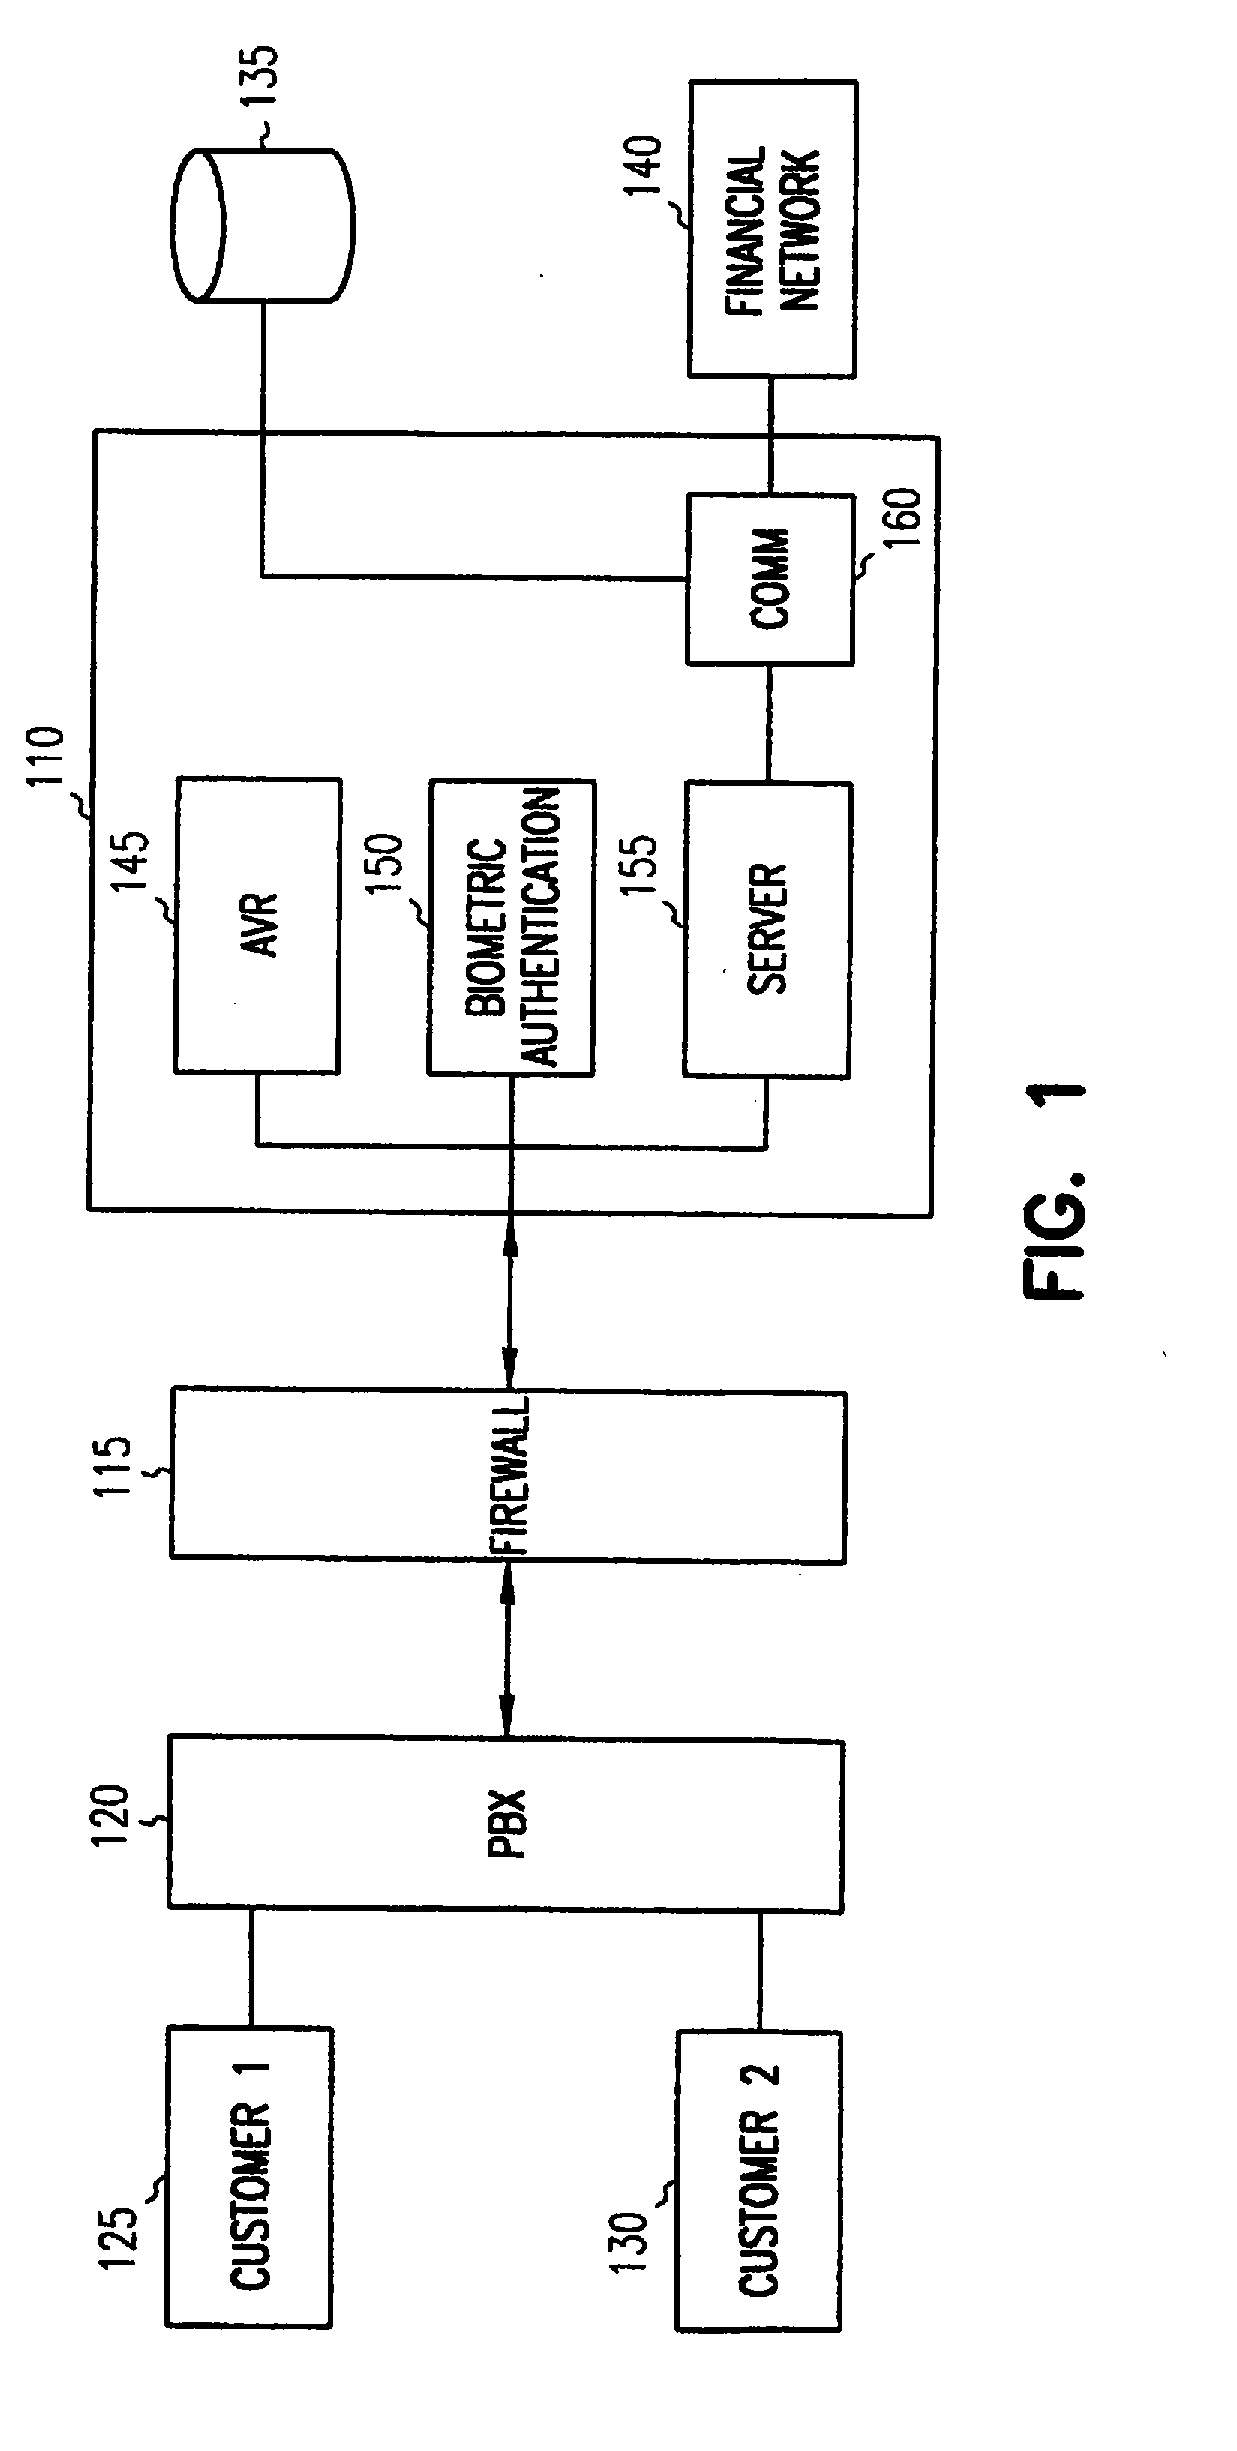 Authenticated and distributed transaction processing